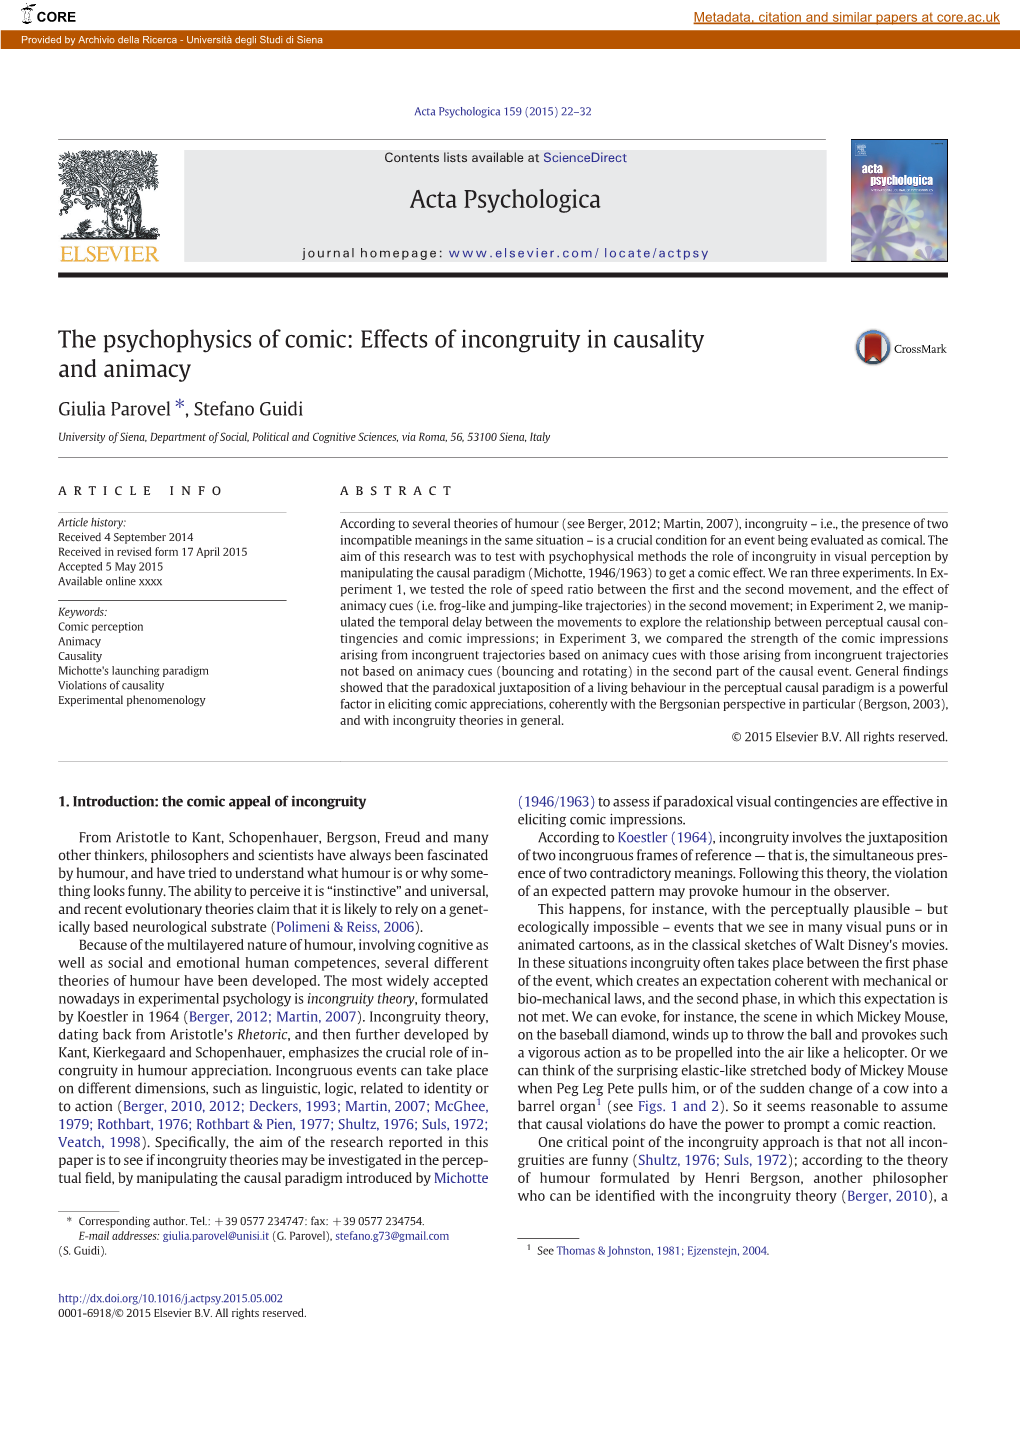 Effects of Incongruity in Causality and Animacy